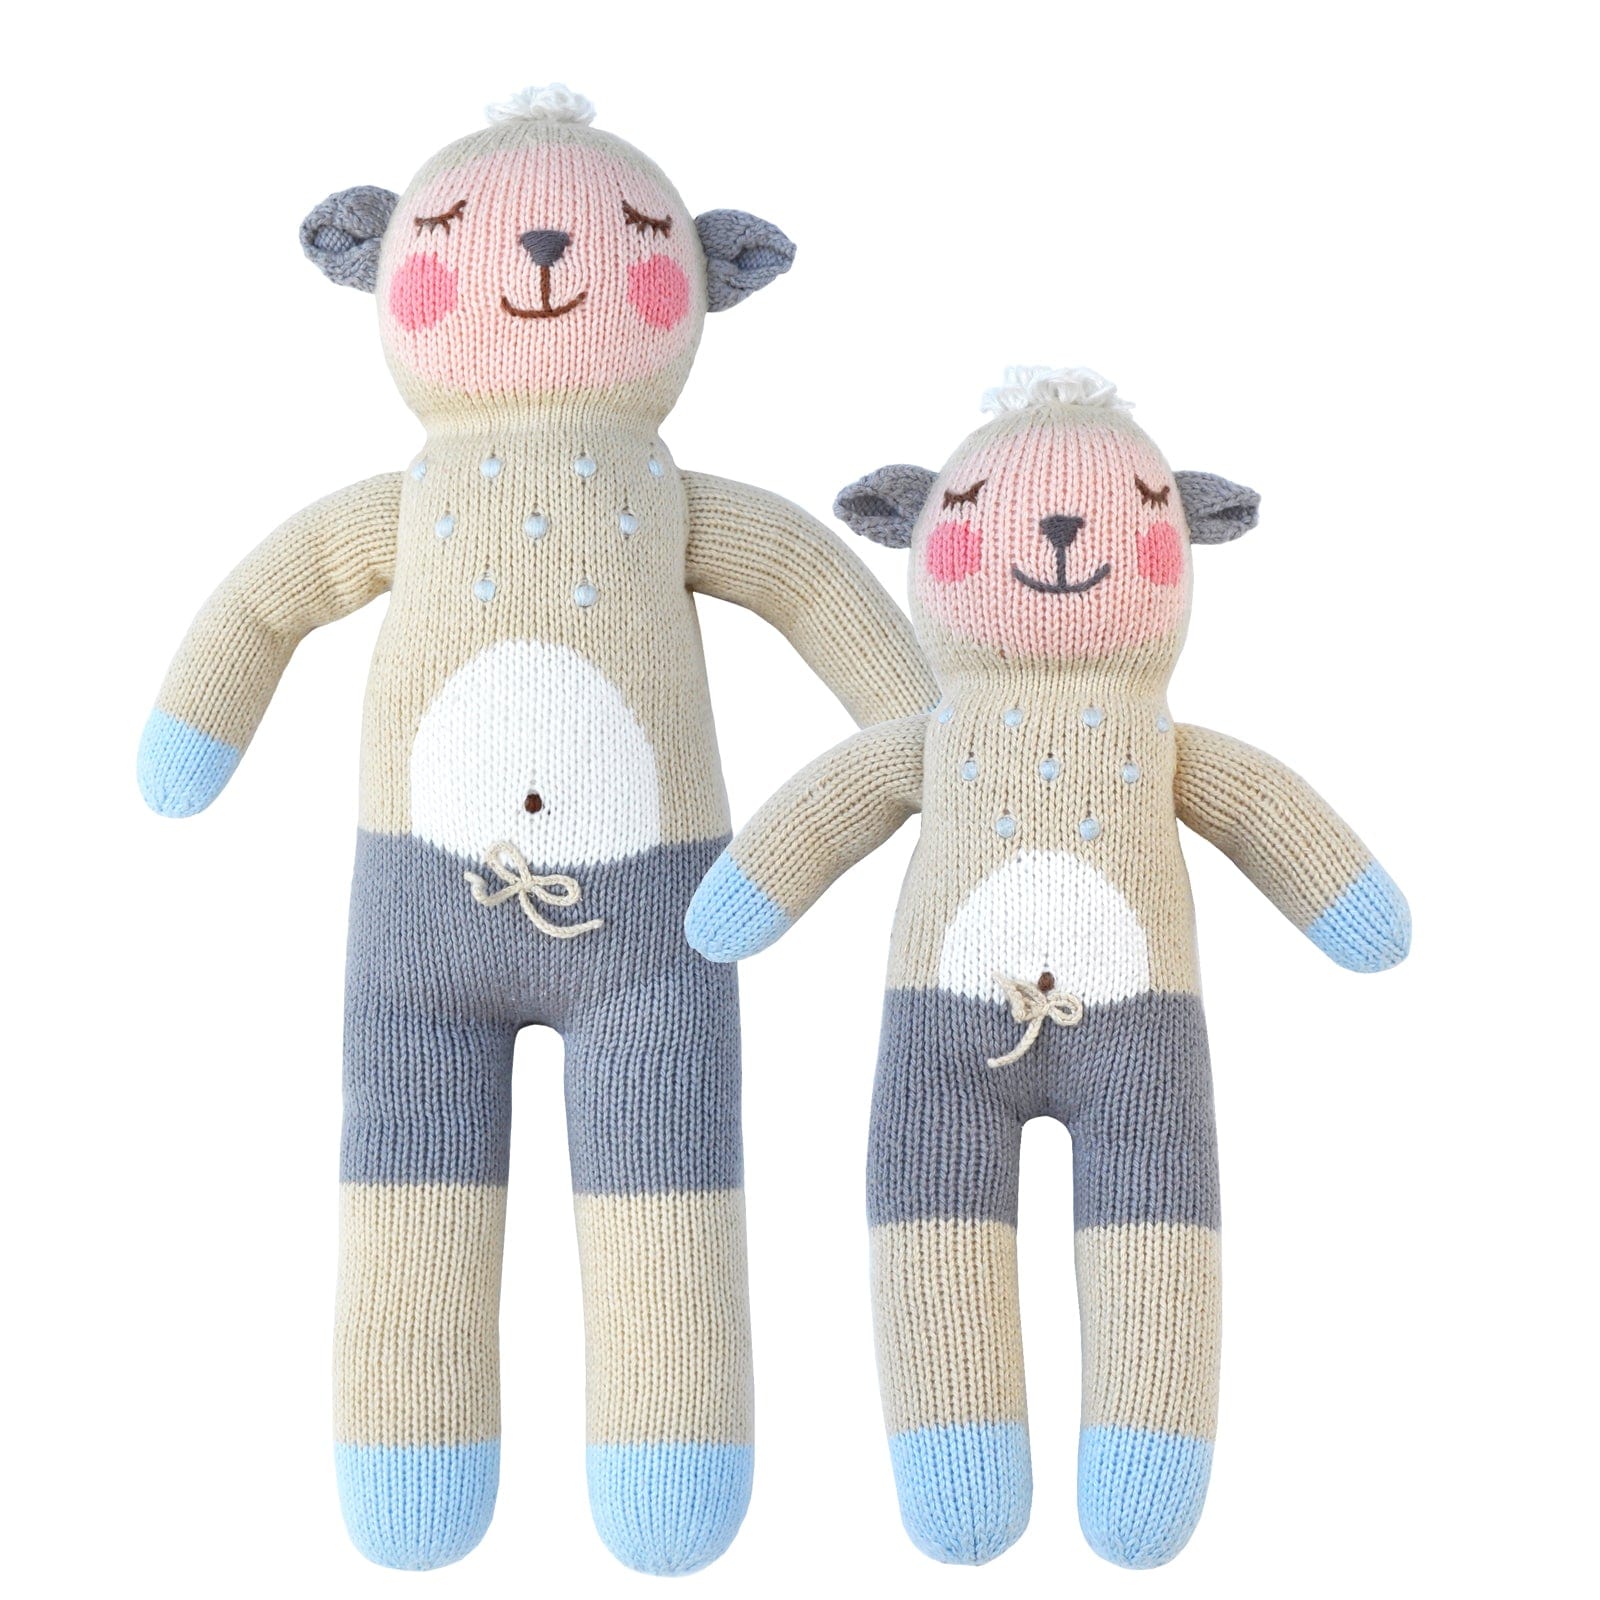 Wooly the Sheep 18"